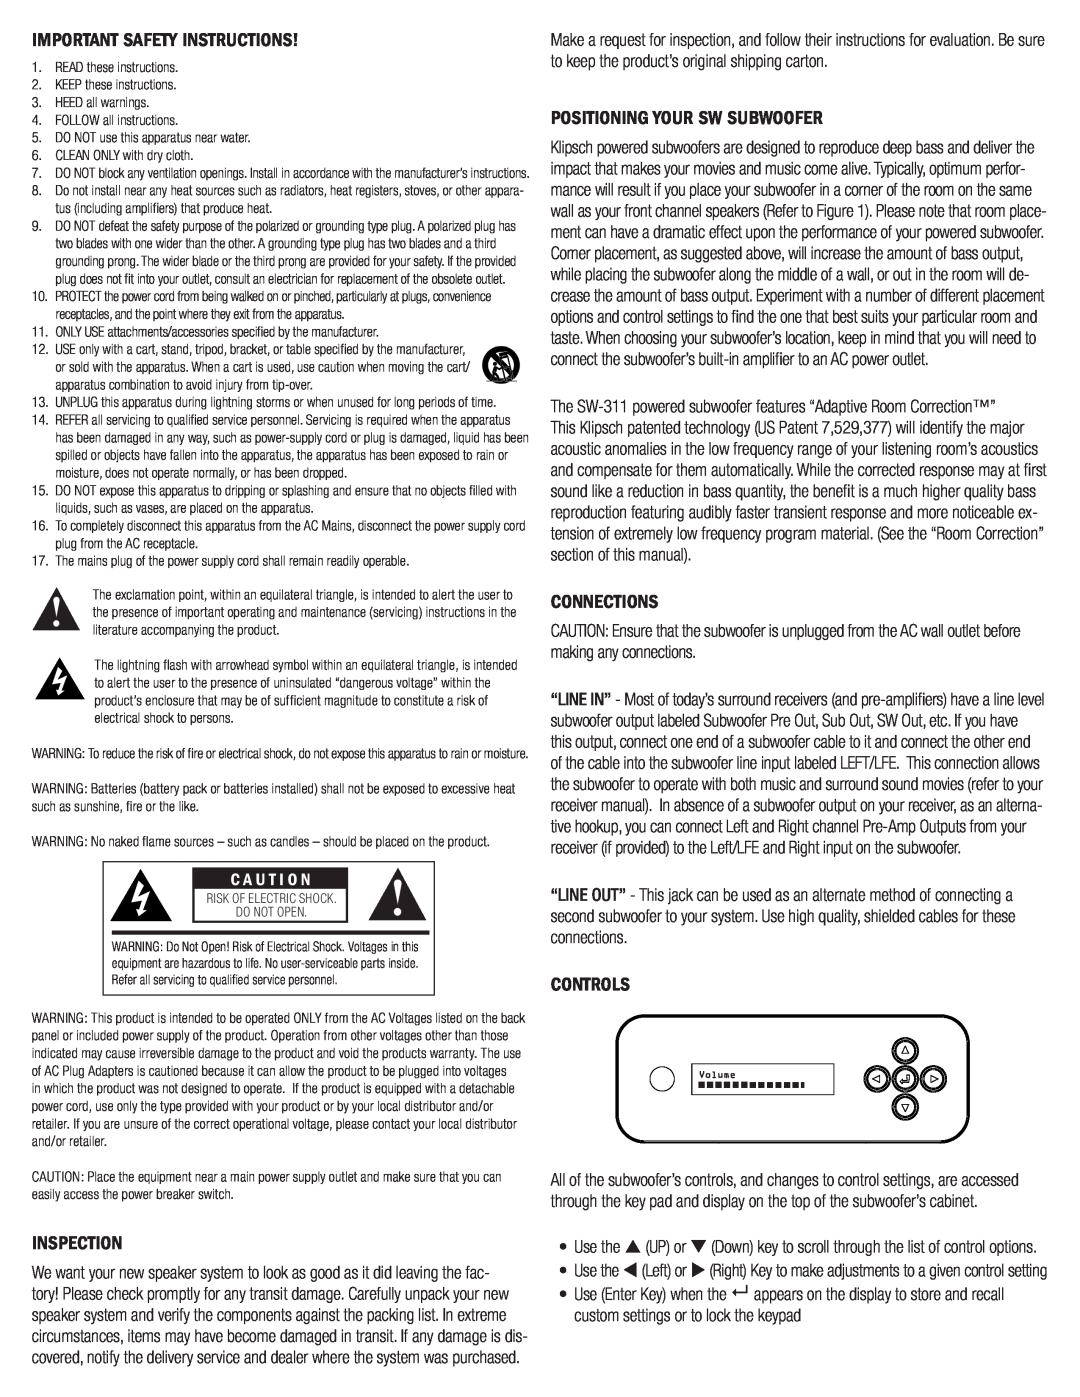 Klipsch SW-311 owner manual Important Safety Instructions, Positioning Your Sw Subwoofer, Connections, Controls, Inspection 